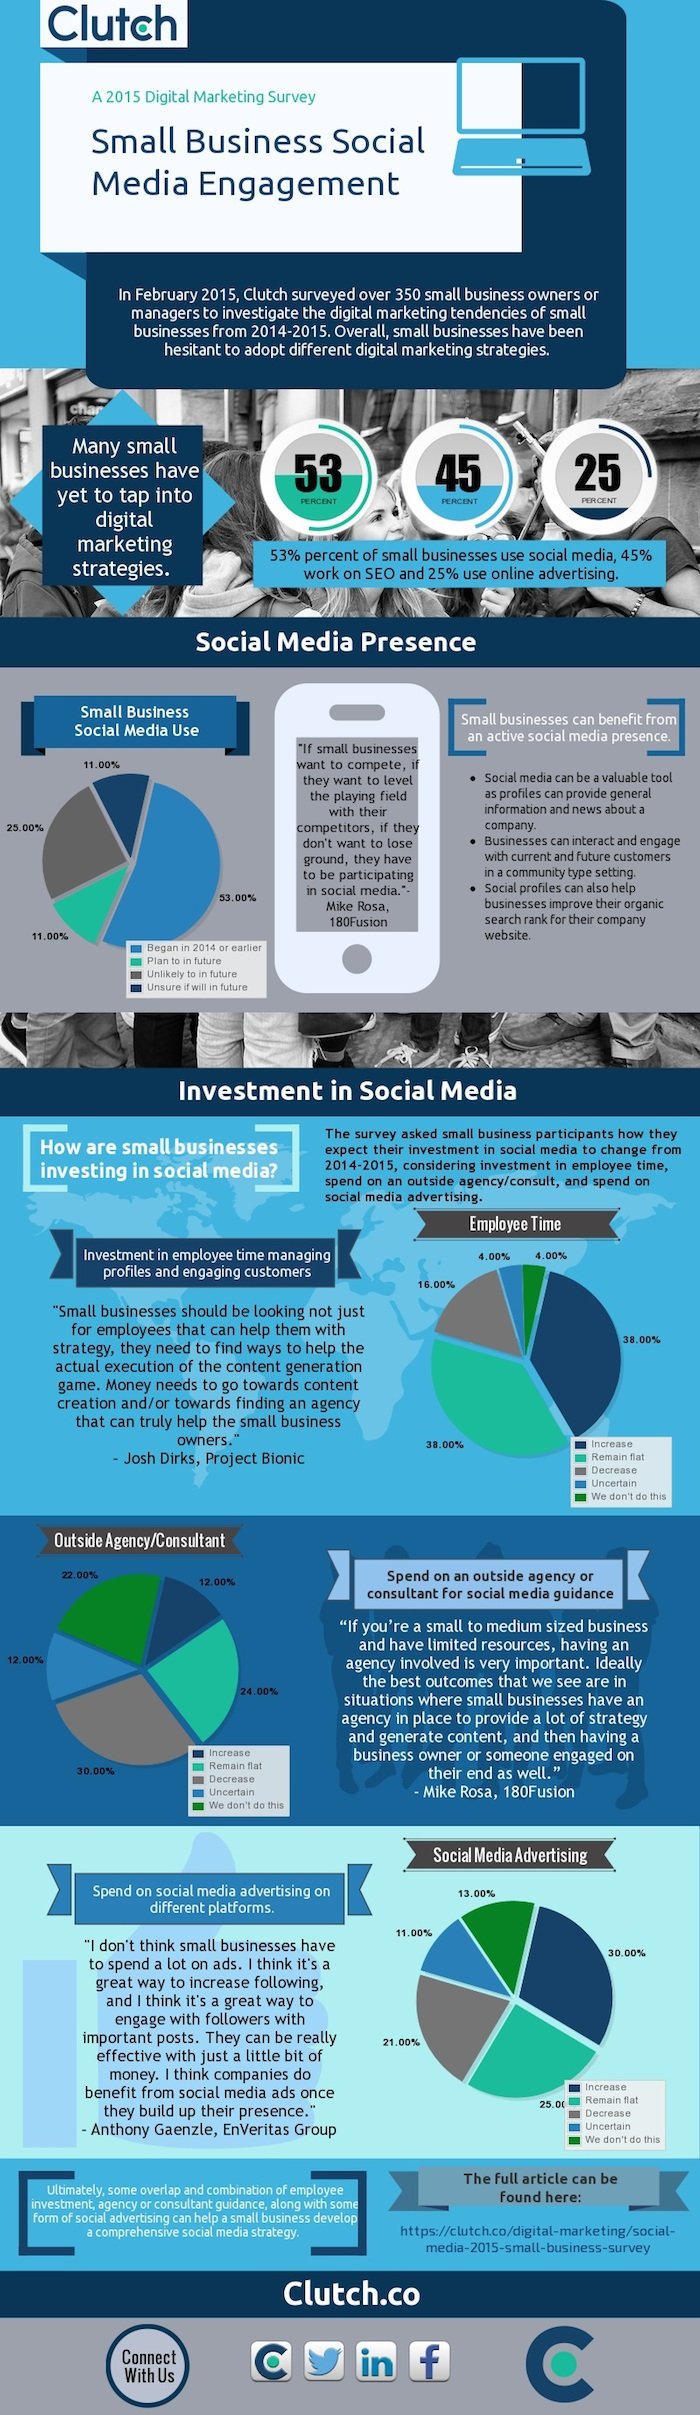 Clutch Infographic Small Business Survey Image Search Influence